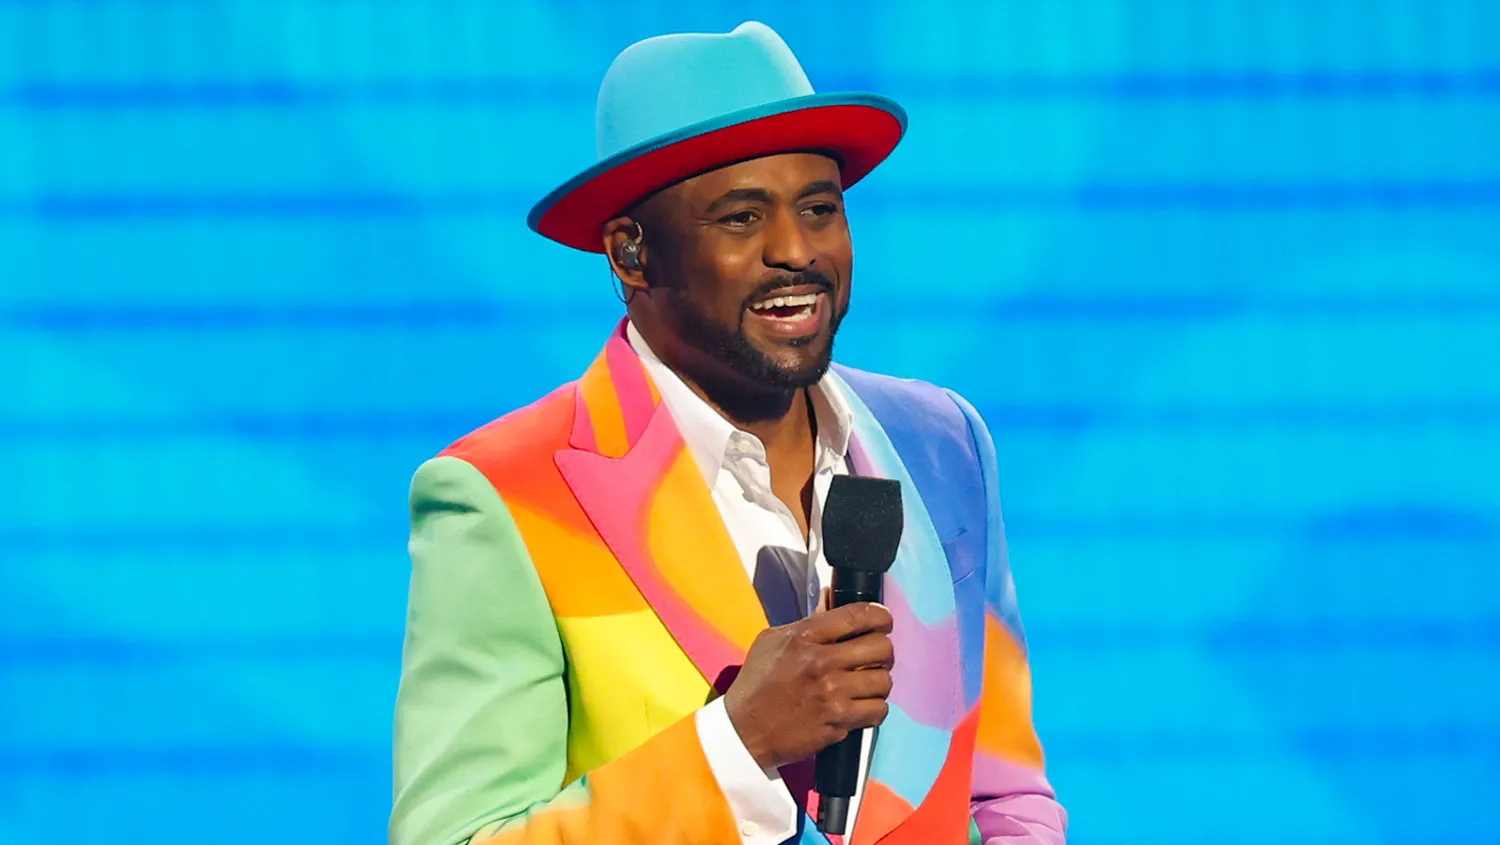 Wayne Brady on the Freedom of Dating as Publicly Pansexual: ‘I’m Not Hiding Anything Now’